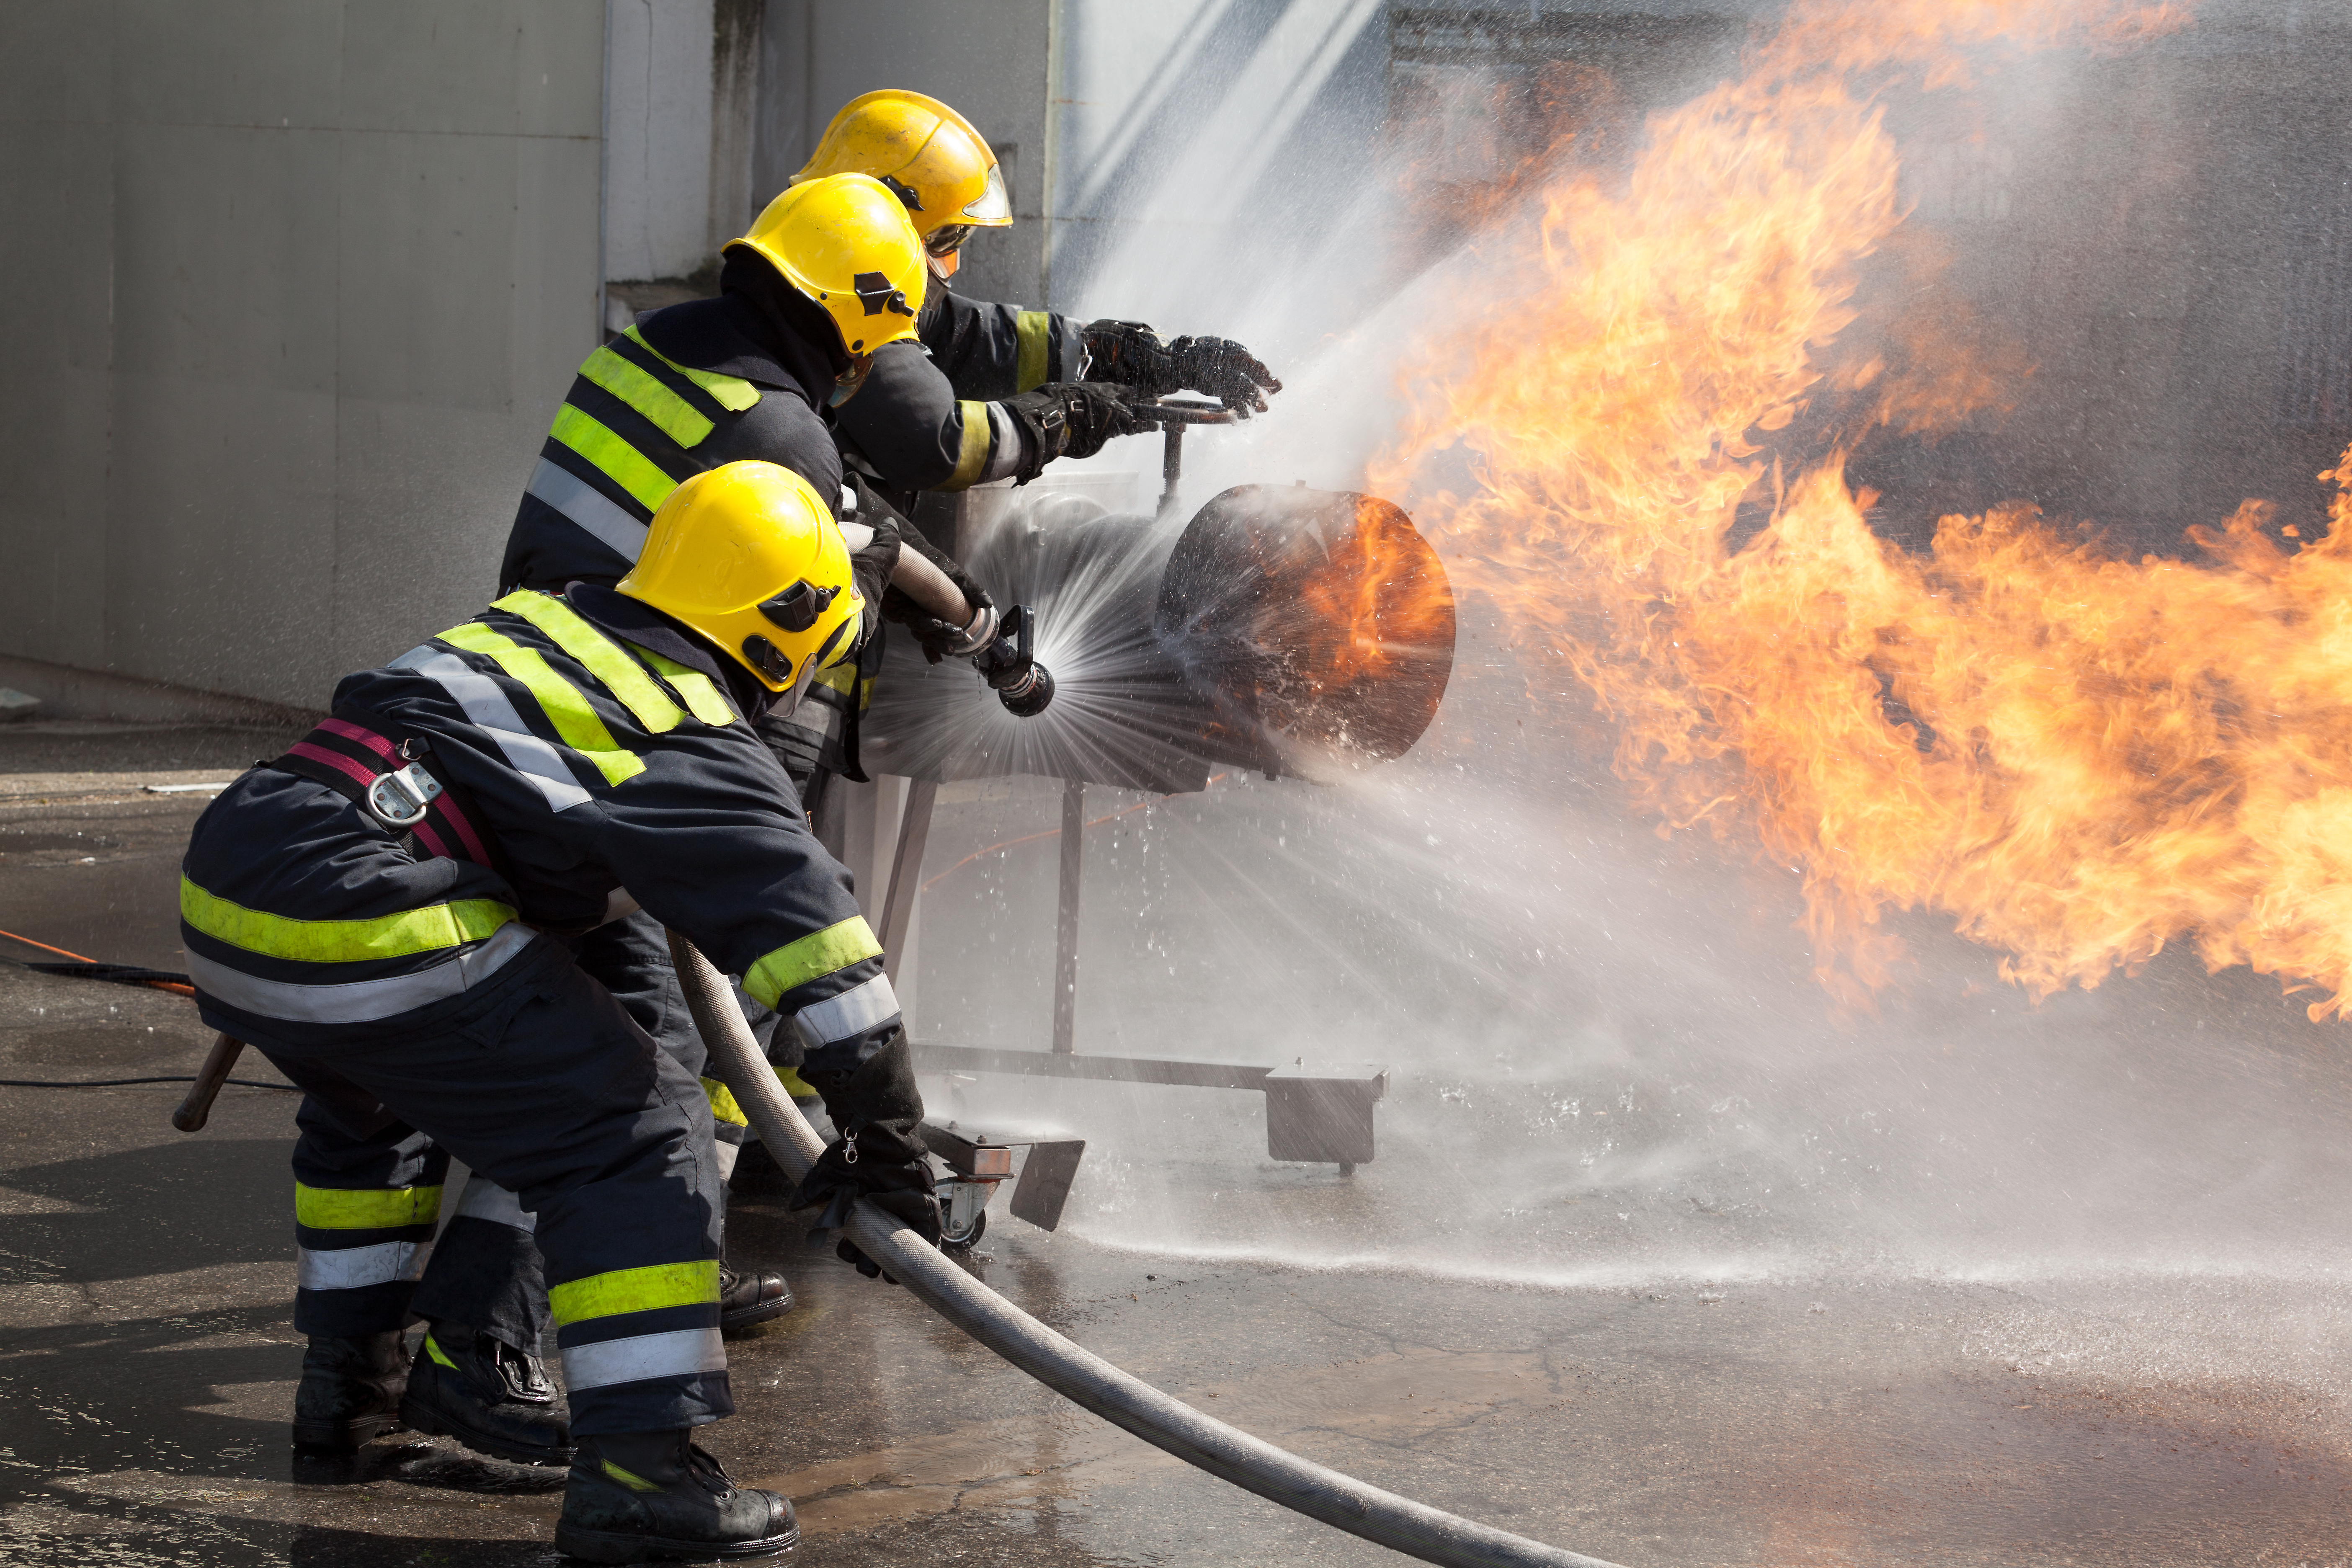 HSE URGES DESIGNERS TO PREPARE NOW FOR REGULATORY CHANGES TO BUILDING SAFETY